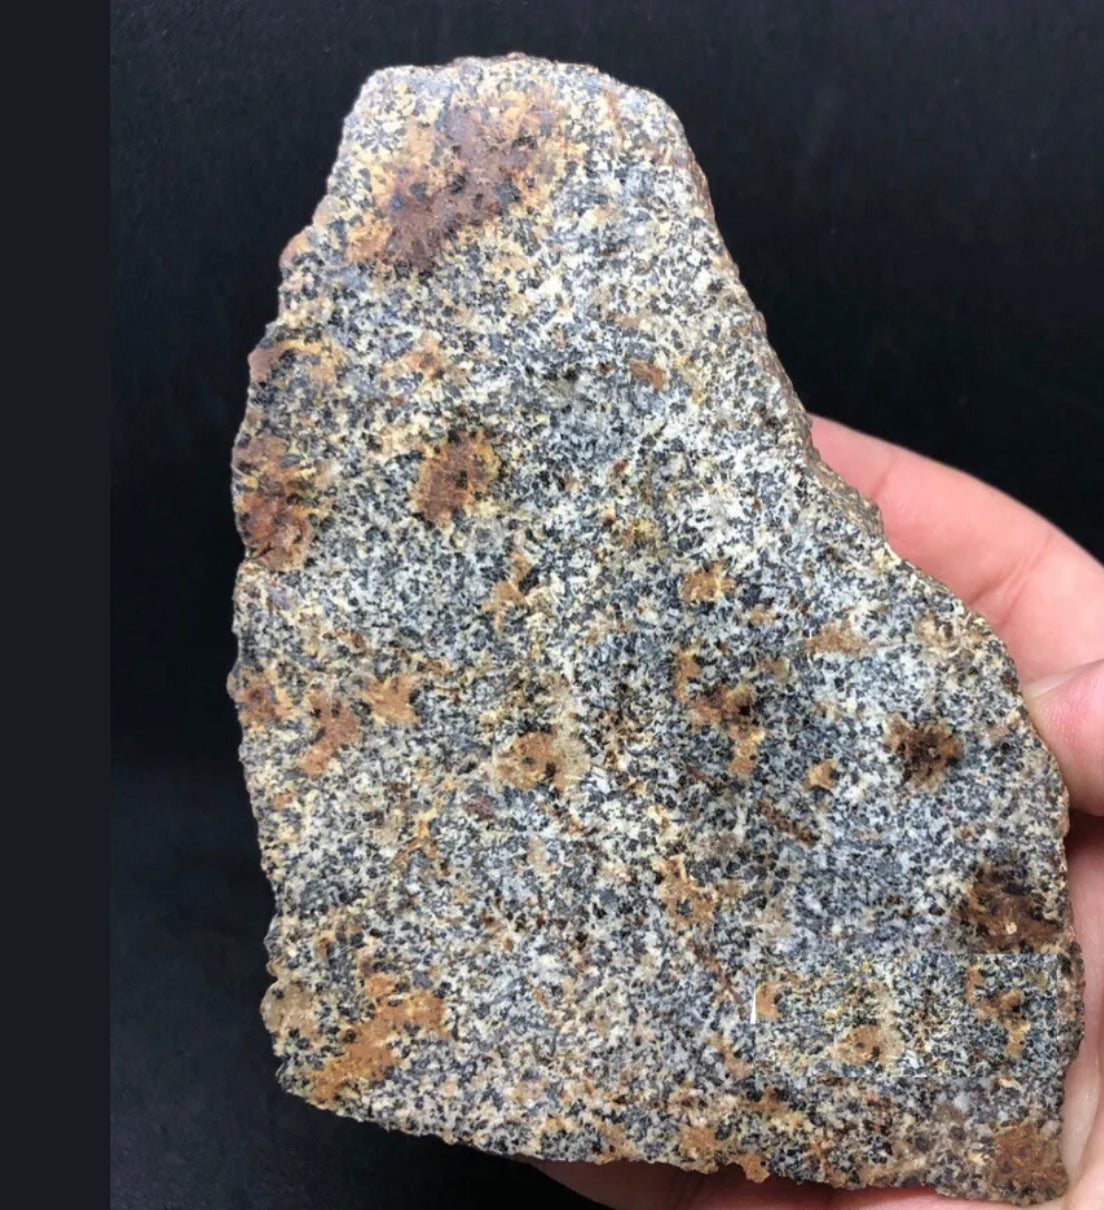 Stunning 473.5g NWA 16312 Eucrite Meteorite - Part Of The HED Group